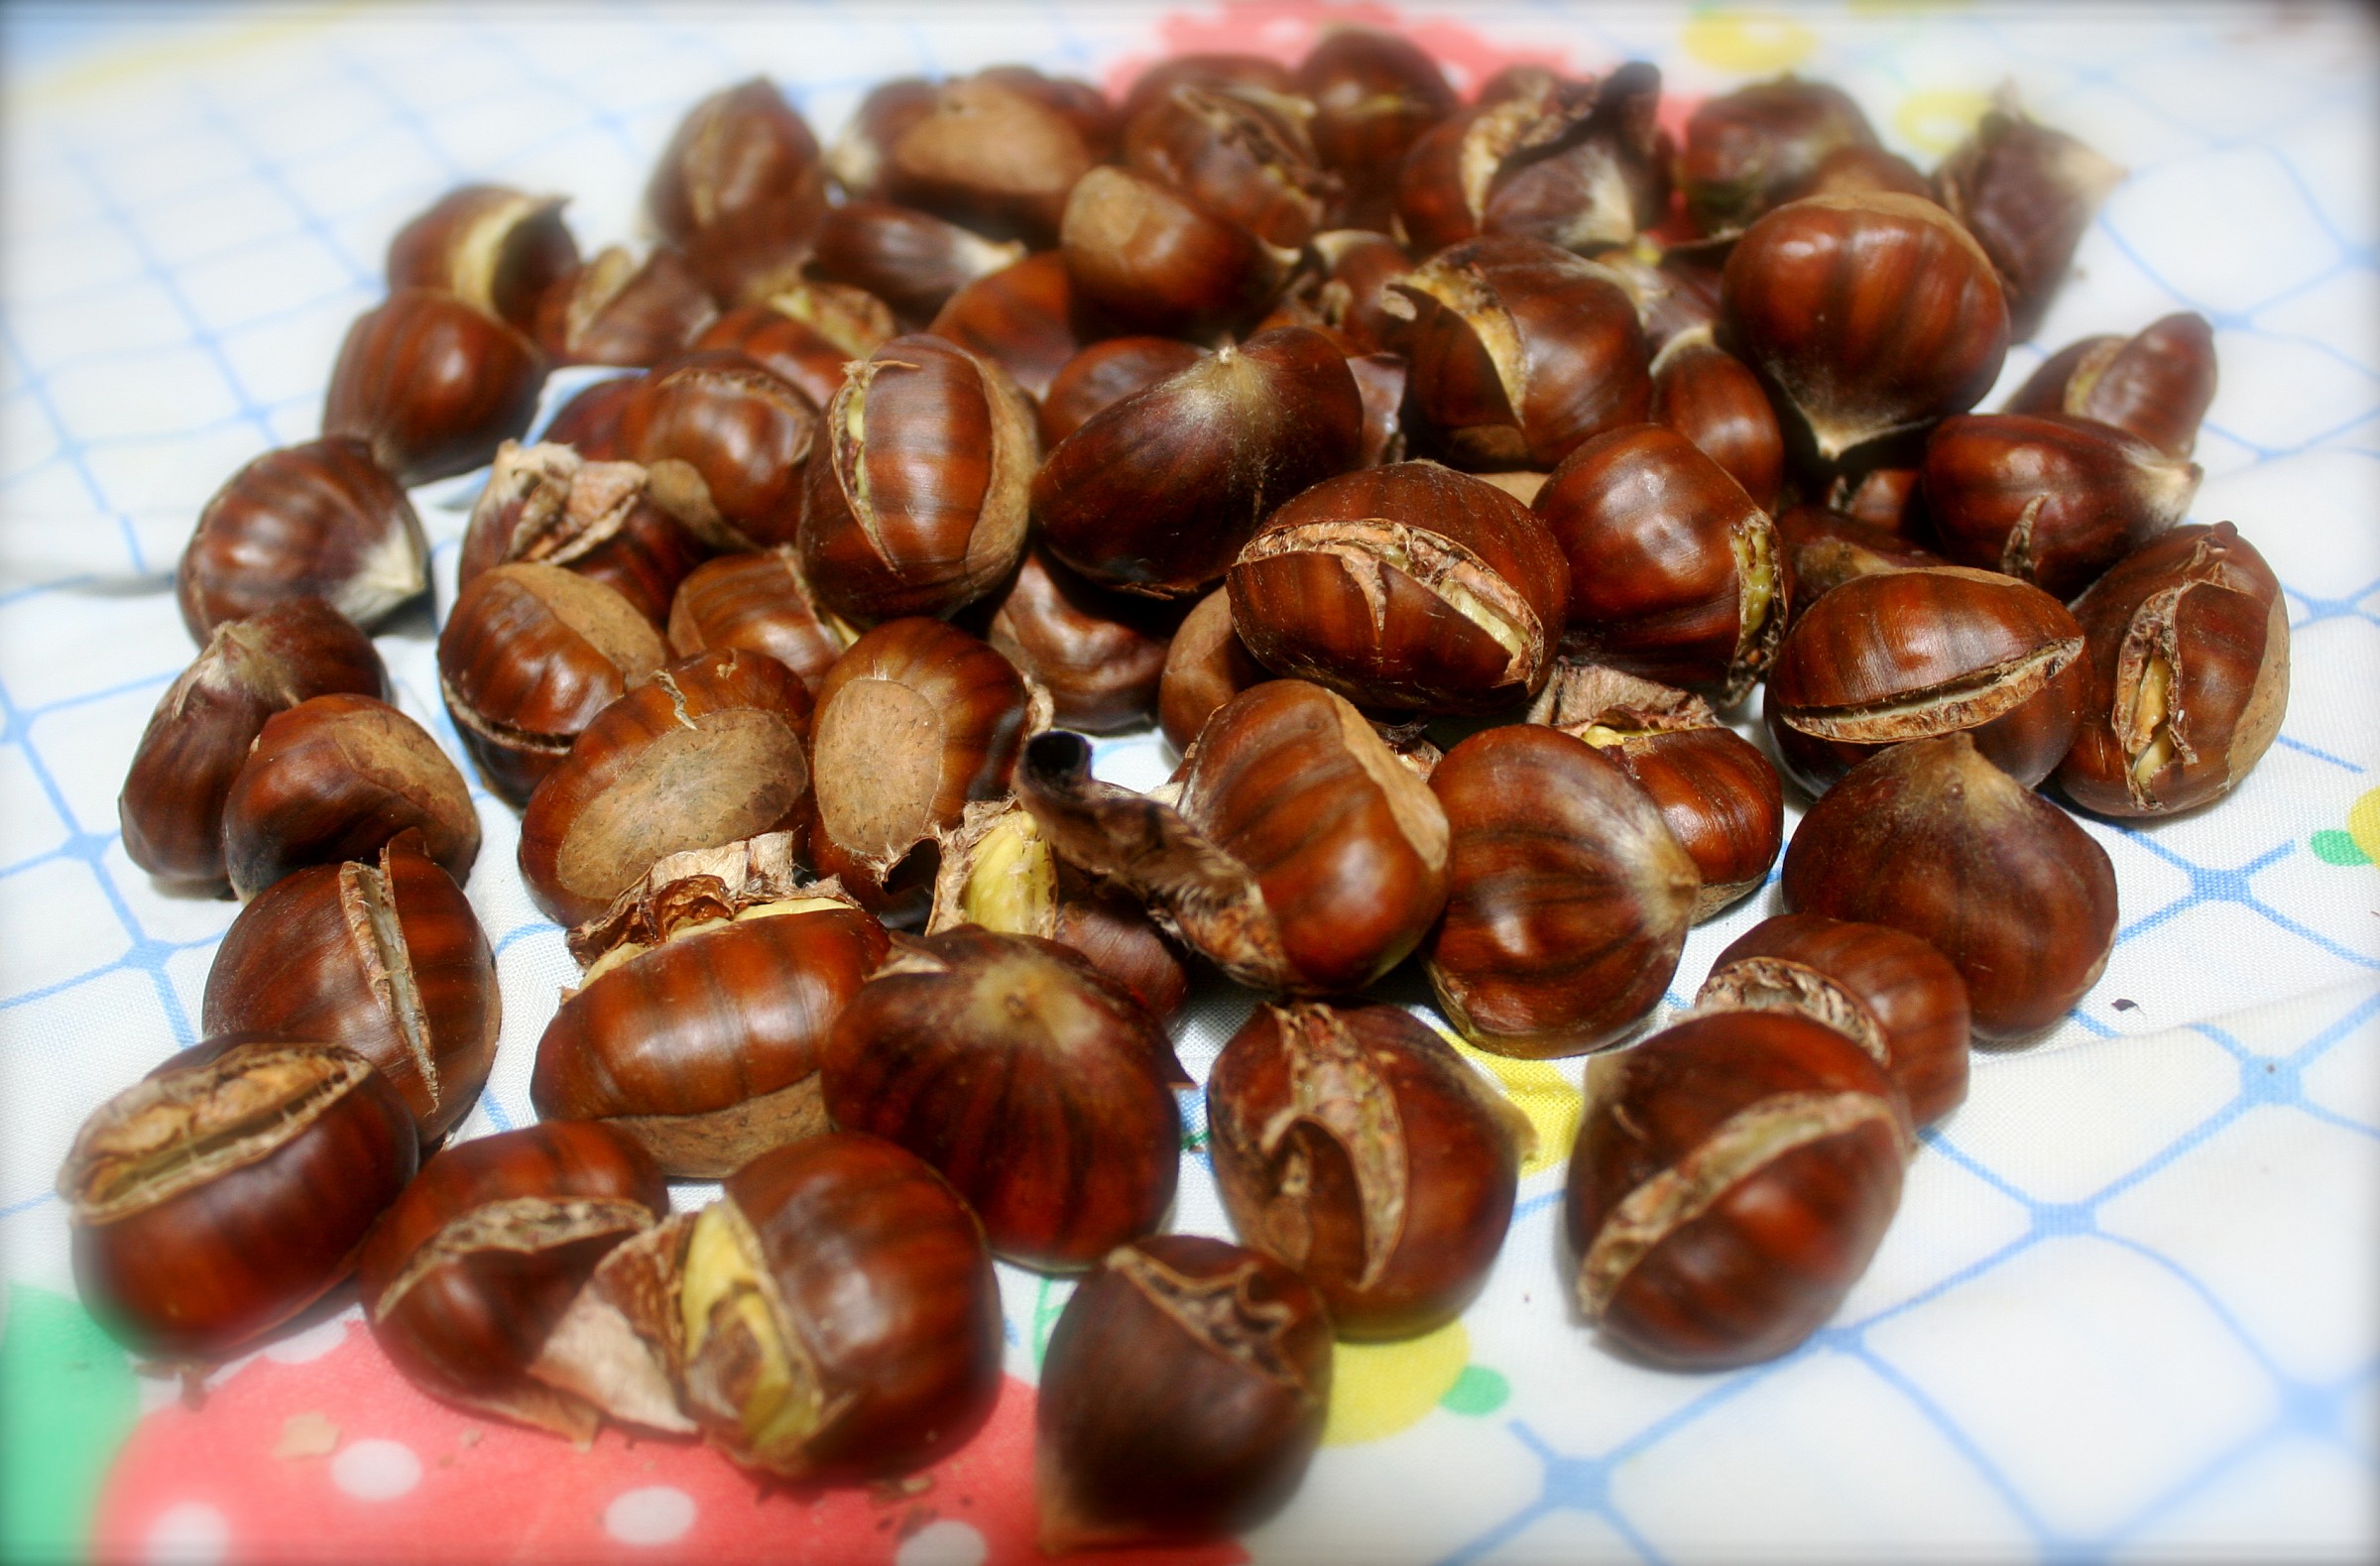 Roasted chestnuts!...